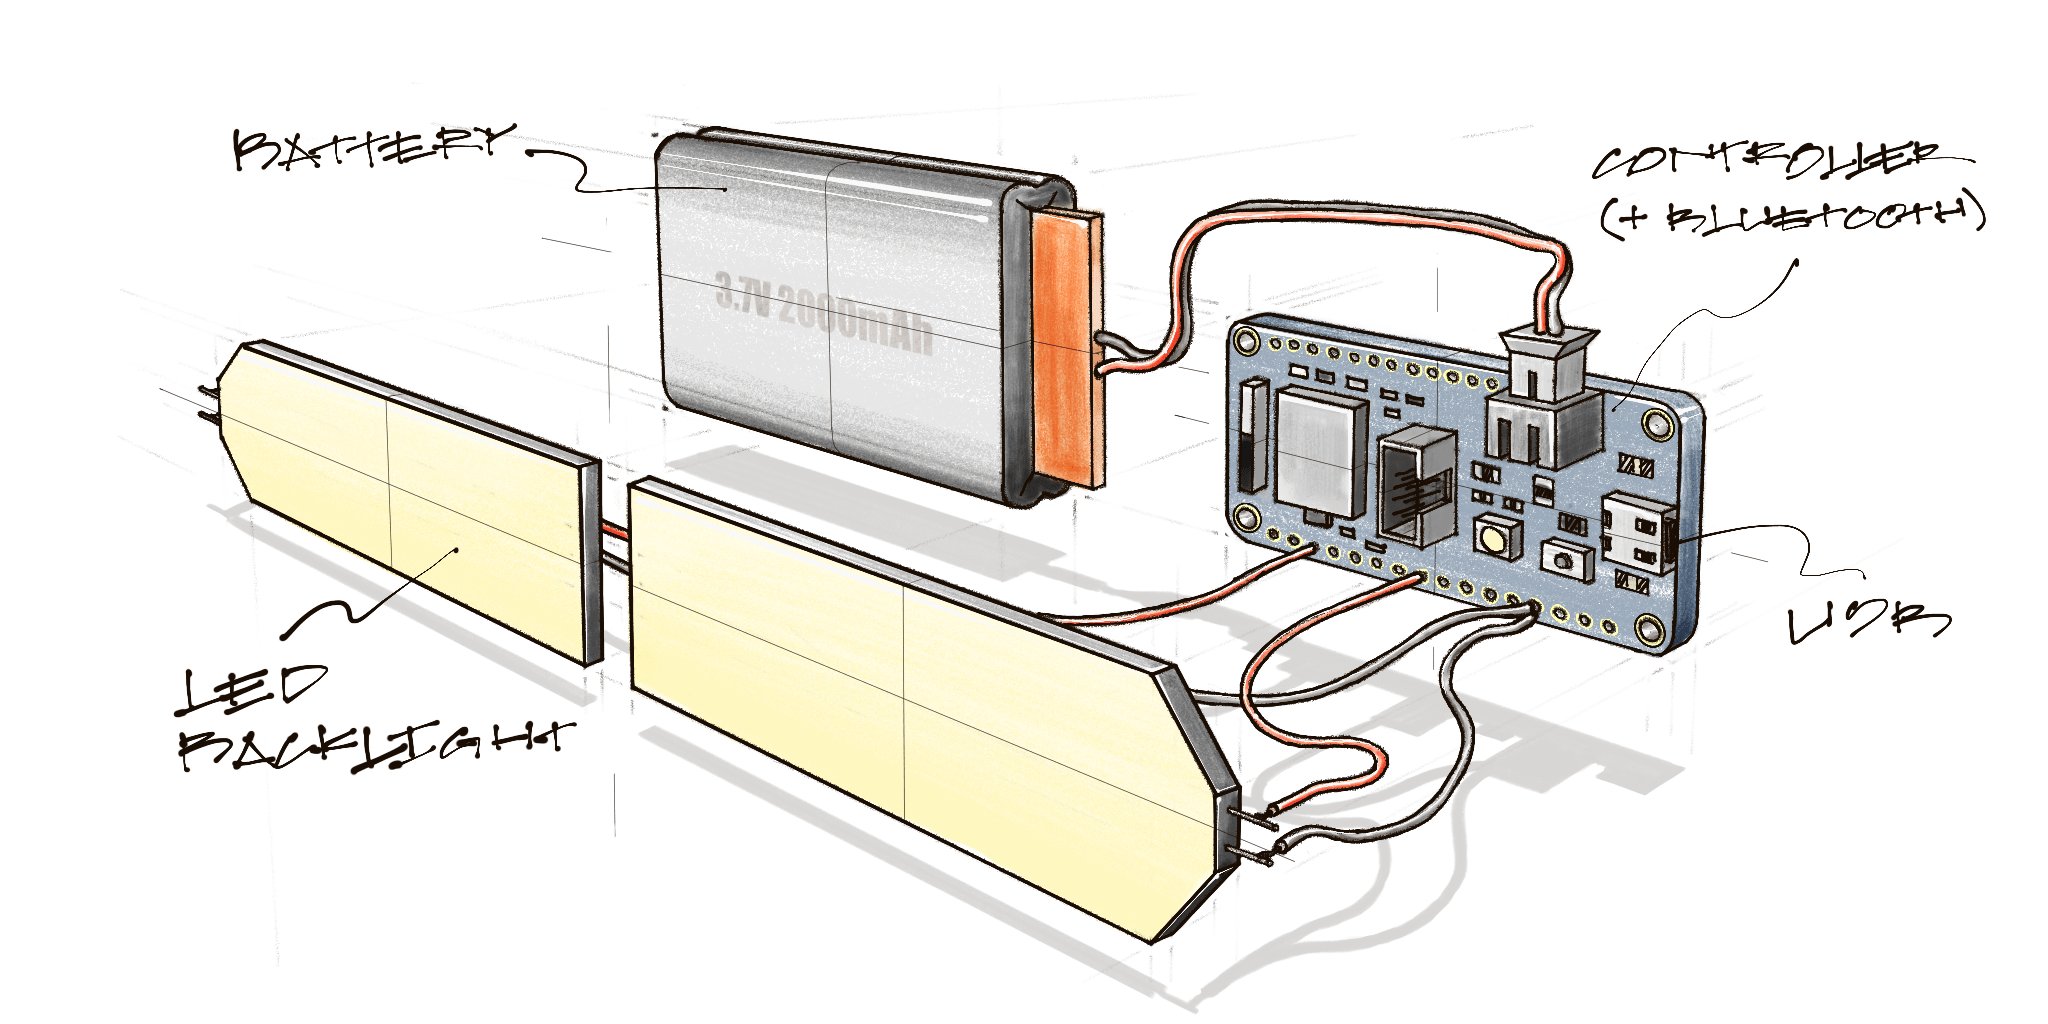 sketch of the internals electronics